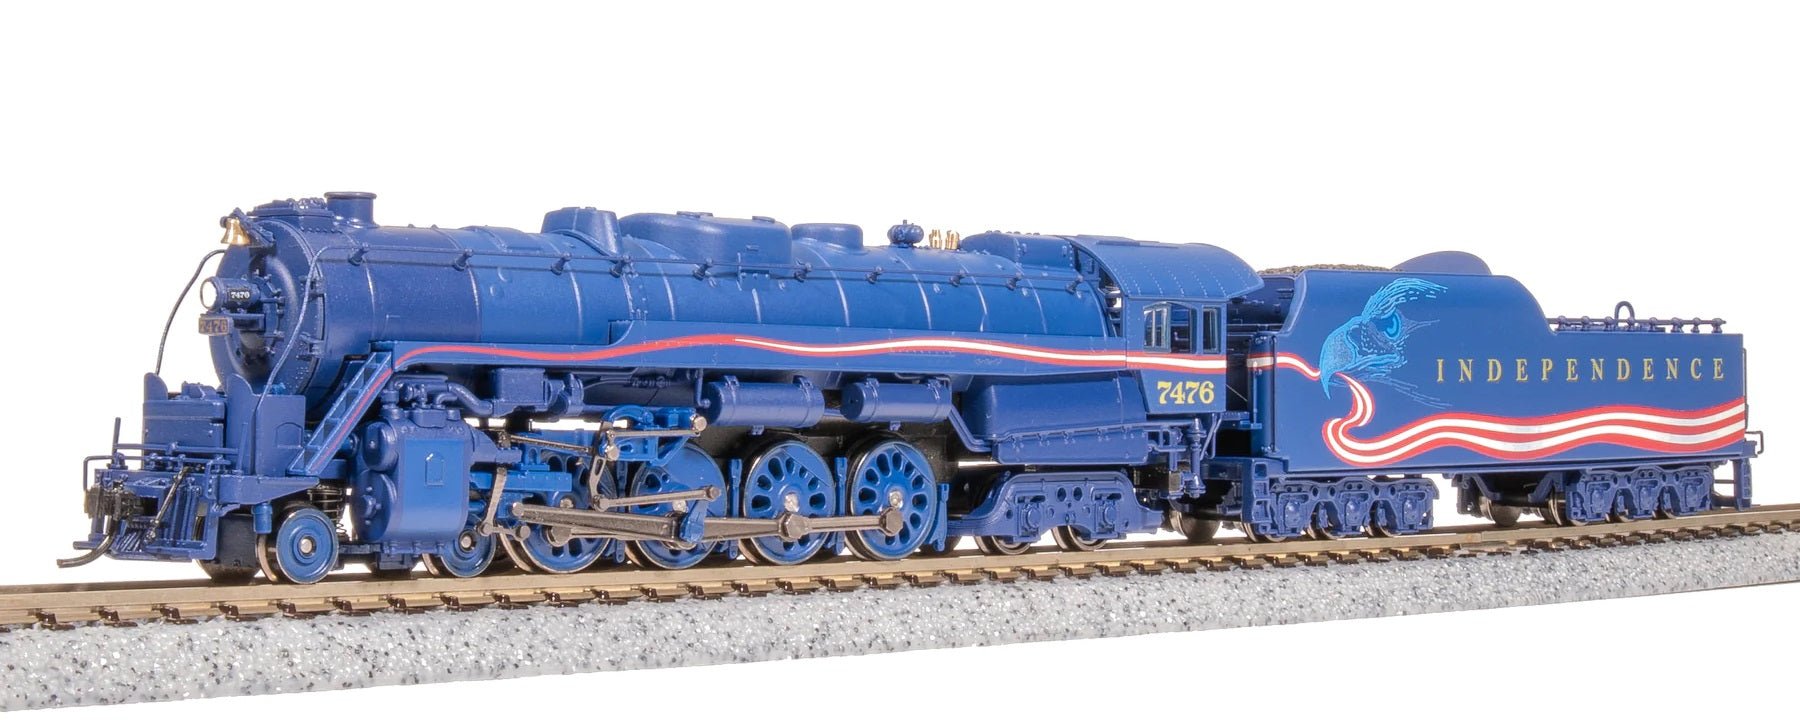 Broadway Limited Reading T1 4 - 8 - 4 Independence Day Fantasy Paint Scheme Paragon4 Sound/DC/DCC Locomotive, N Scale - Micro - Mark Locomotives